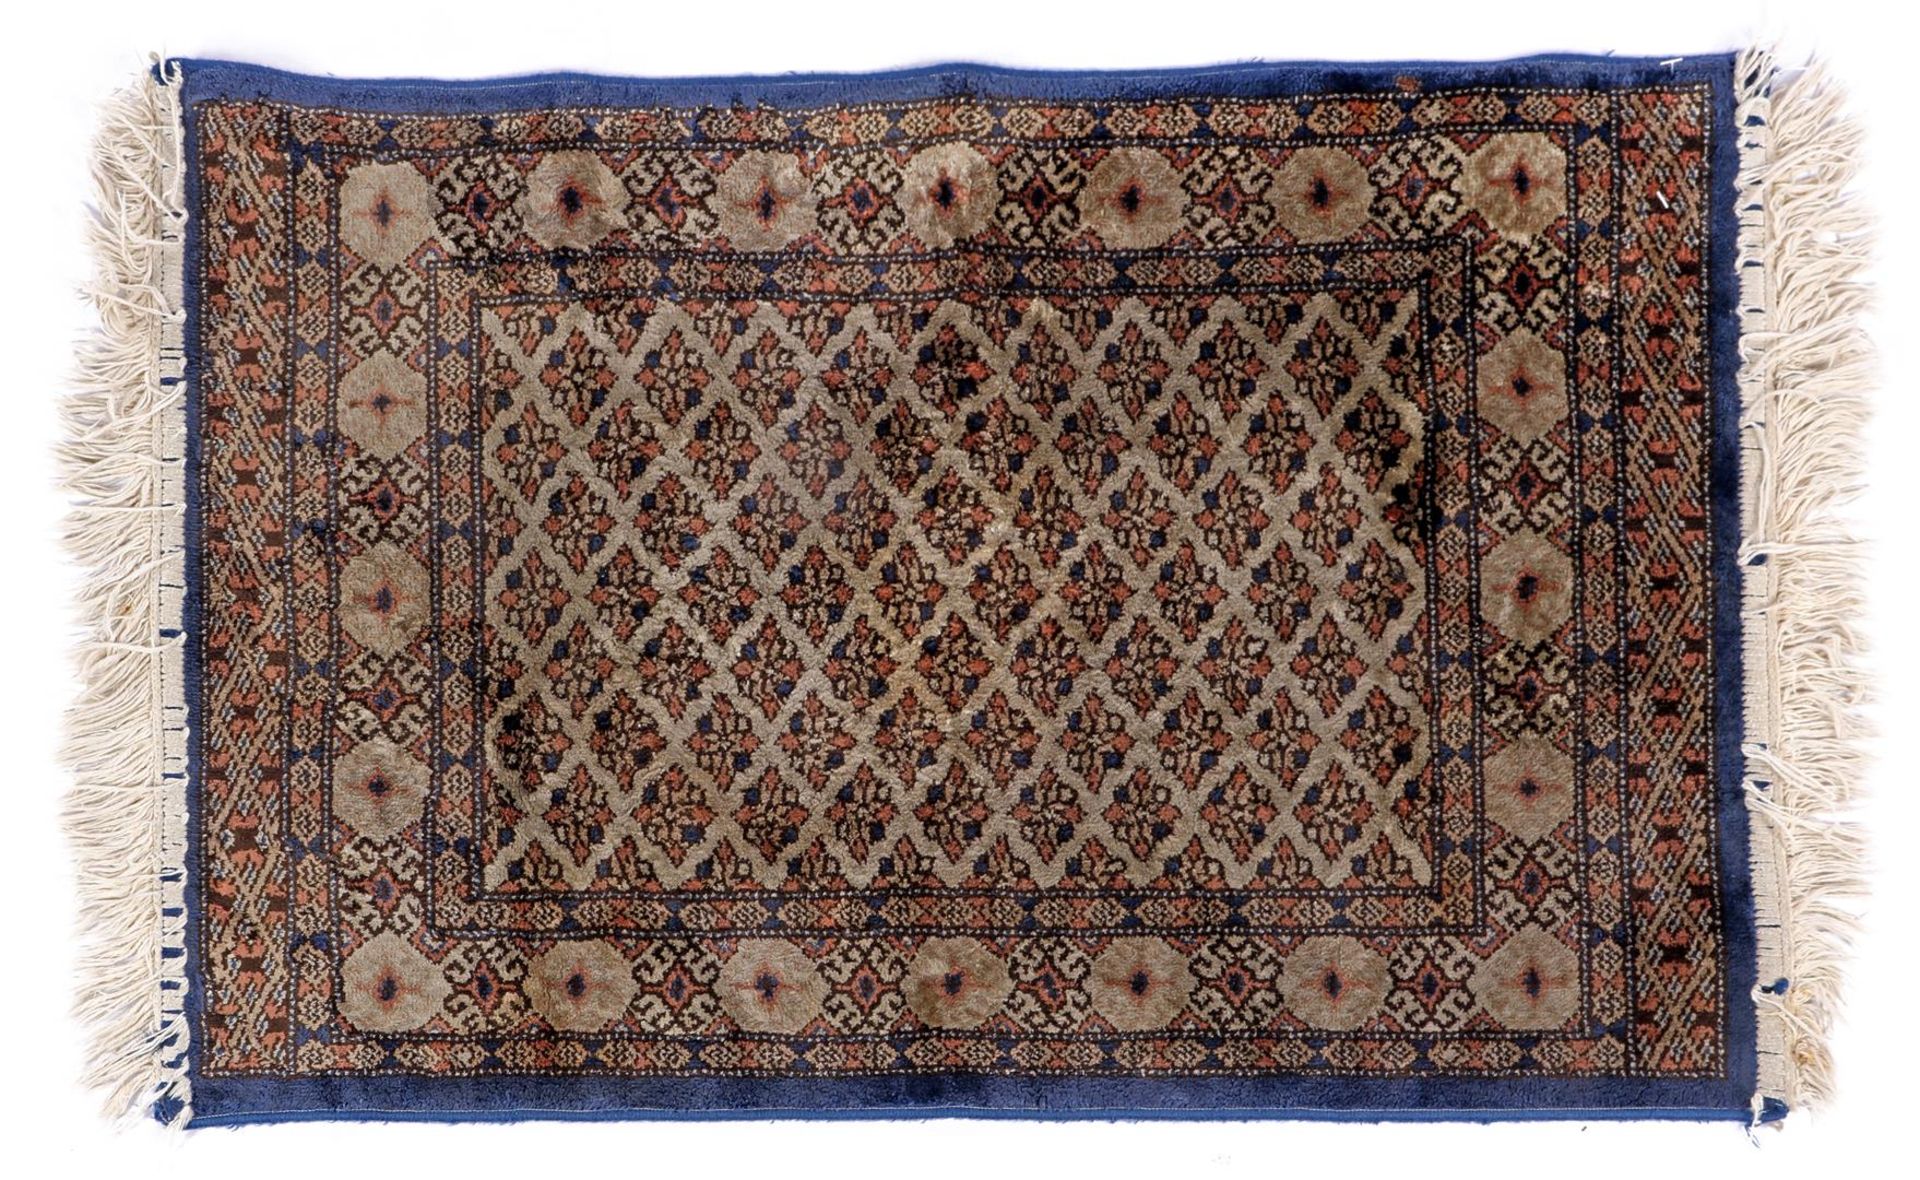 Hand-knotted wool carpet with décor